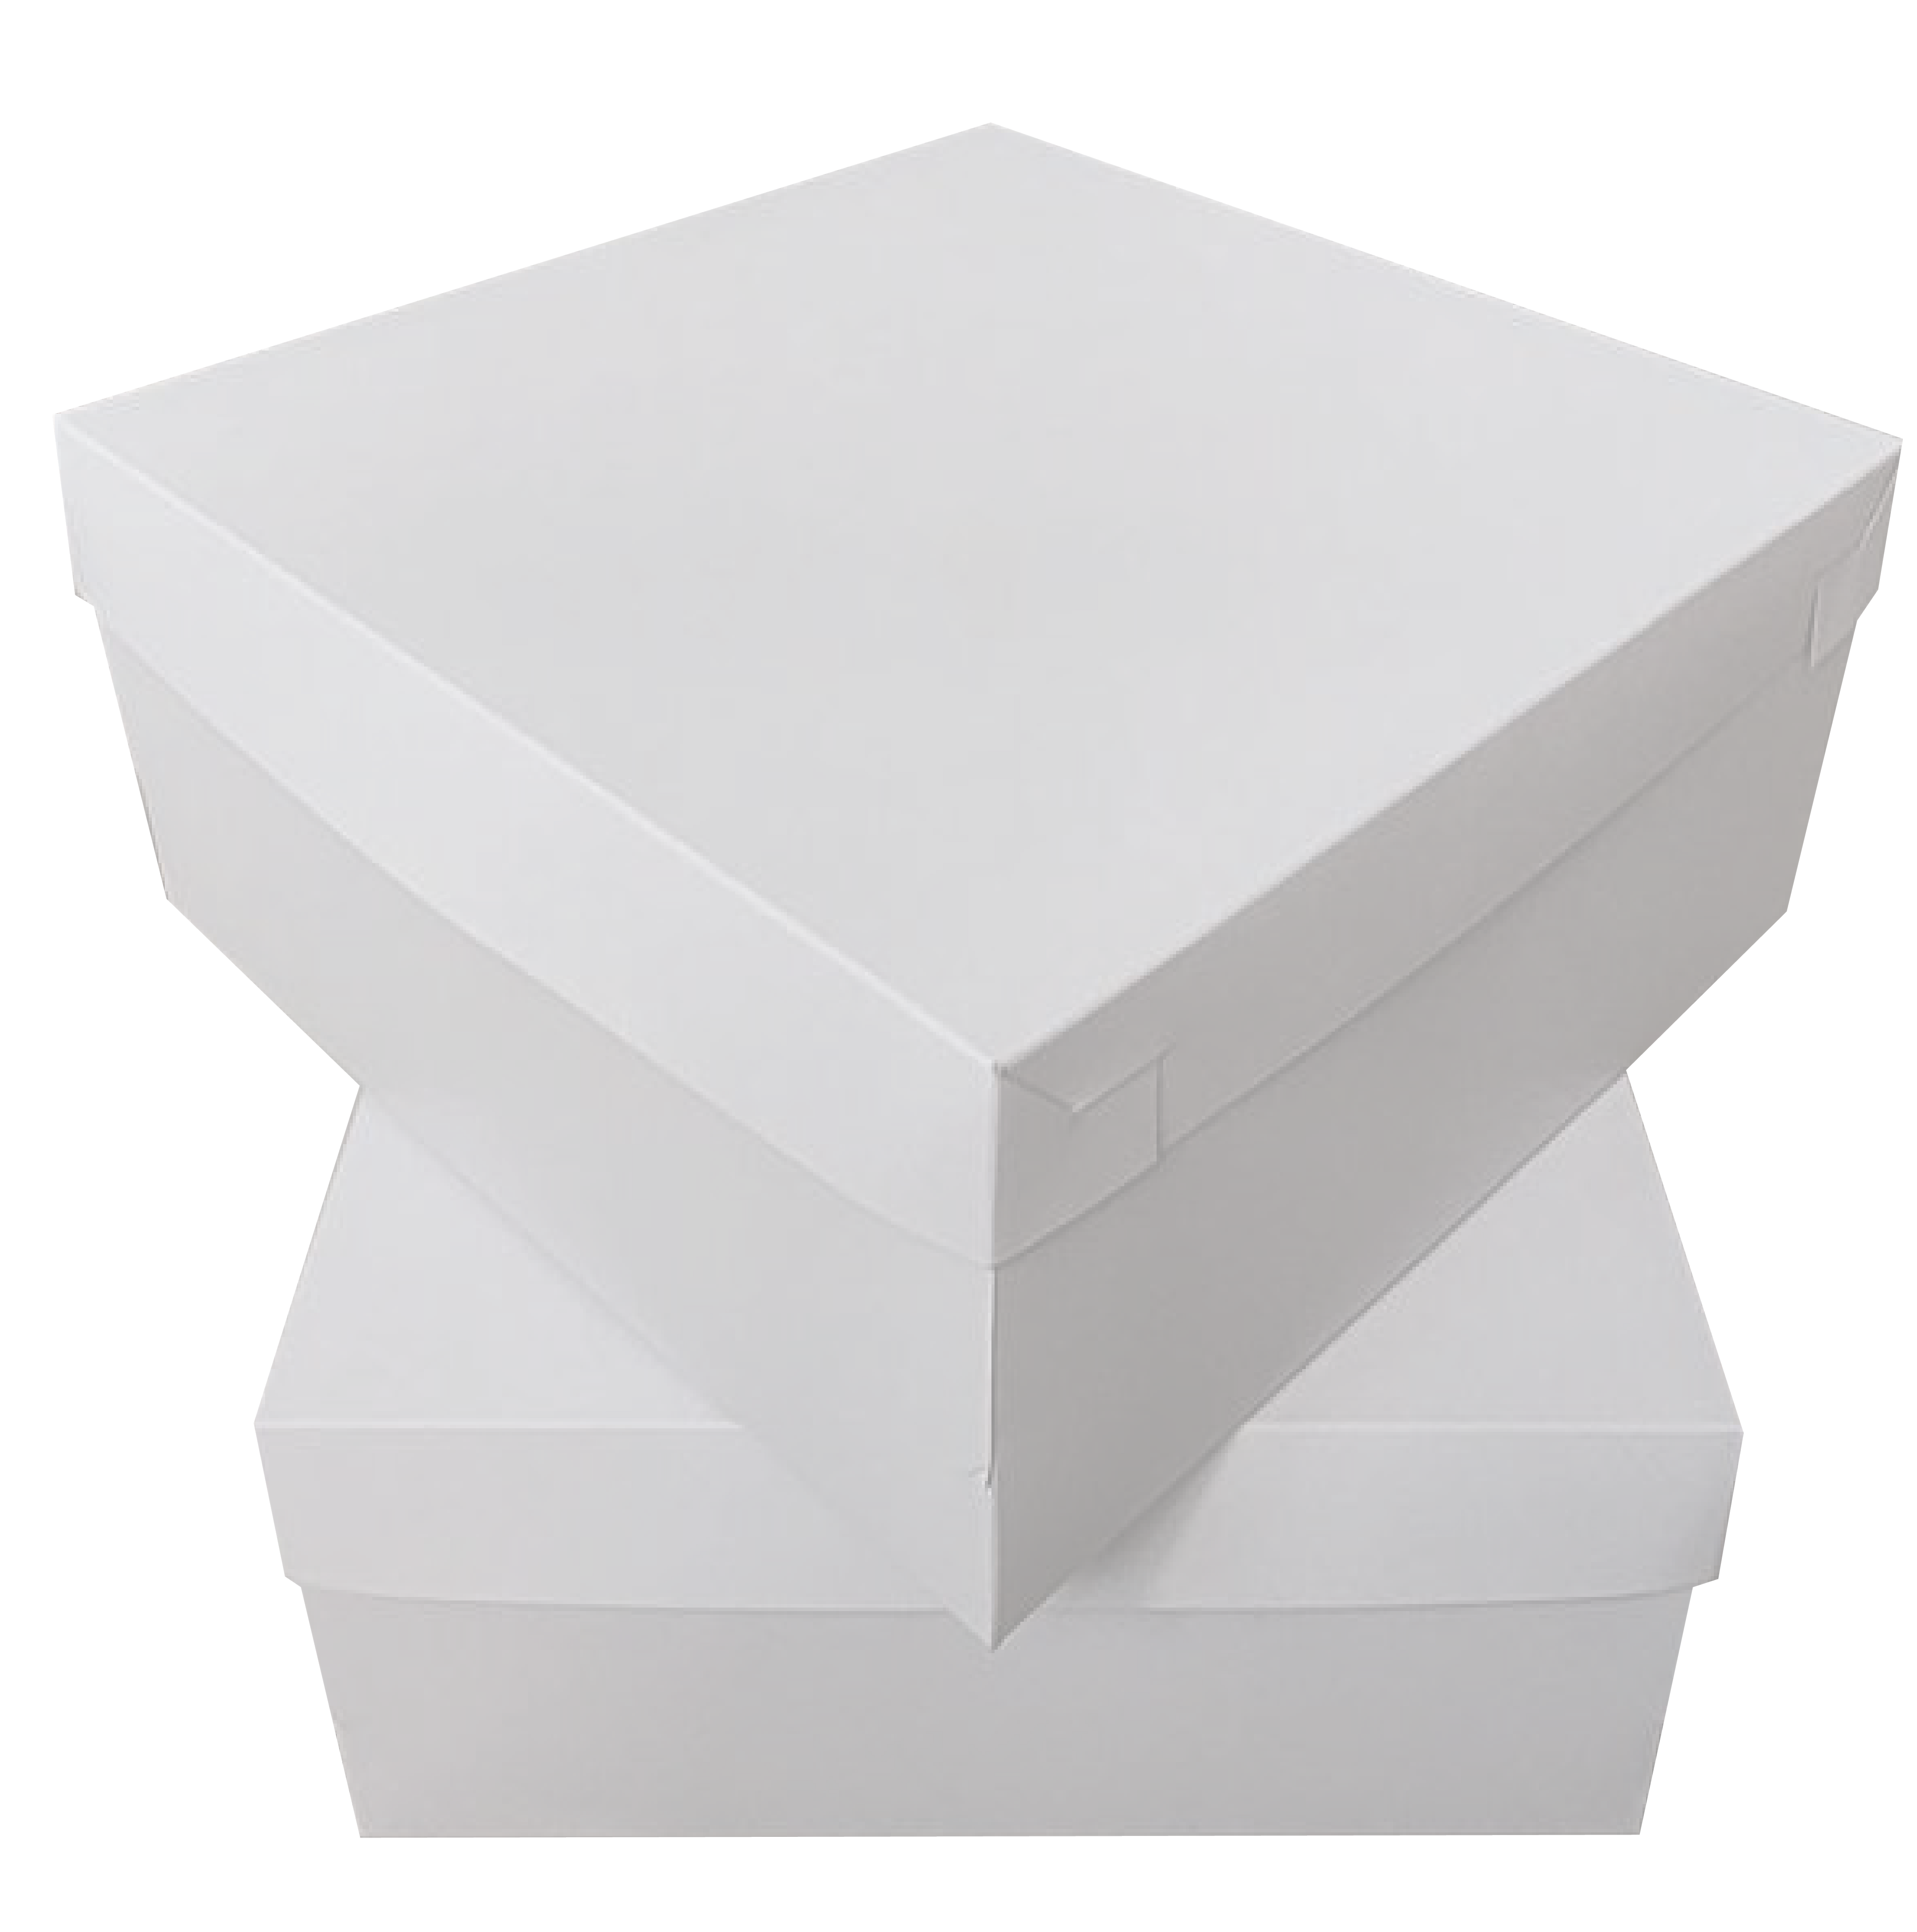 Genesee Scientific 21-141, 3-inch Cardboard Box with Lid, White 25-Place  Divider, 1 Box/Unit - 21-141